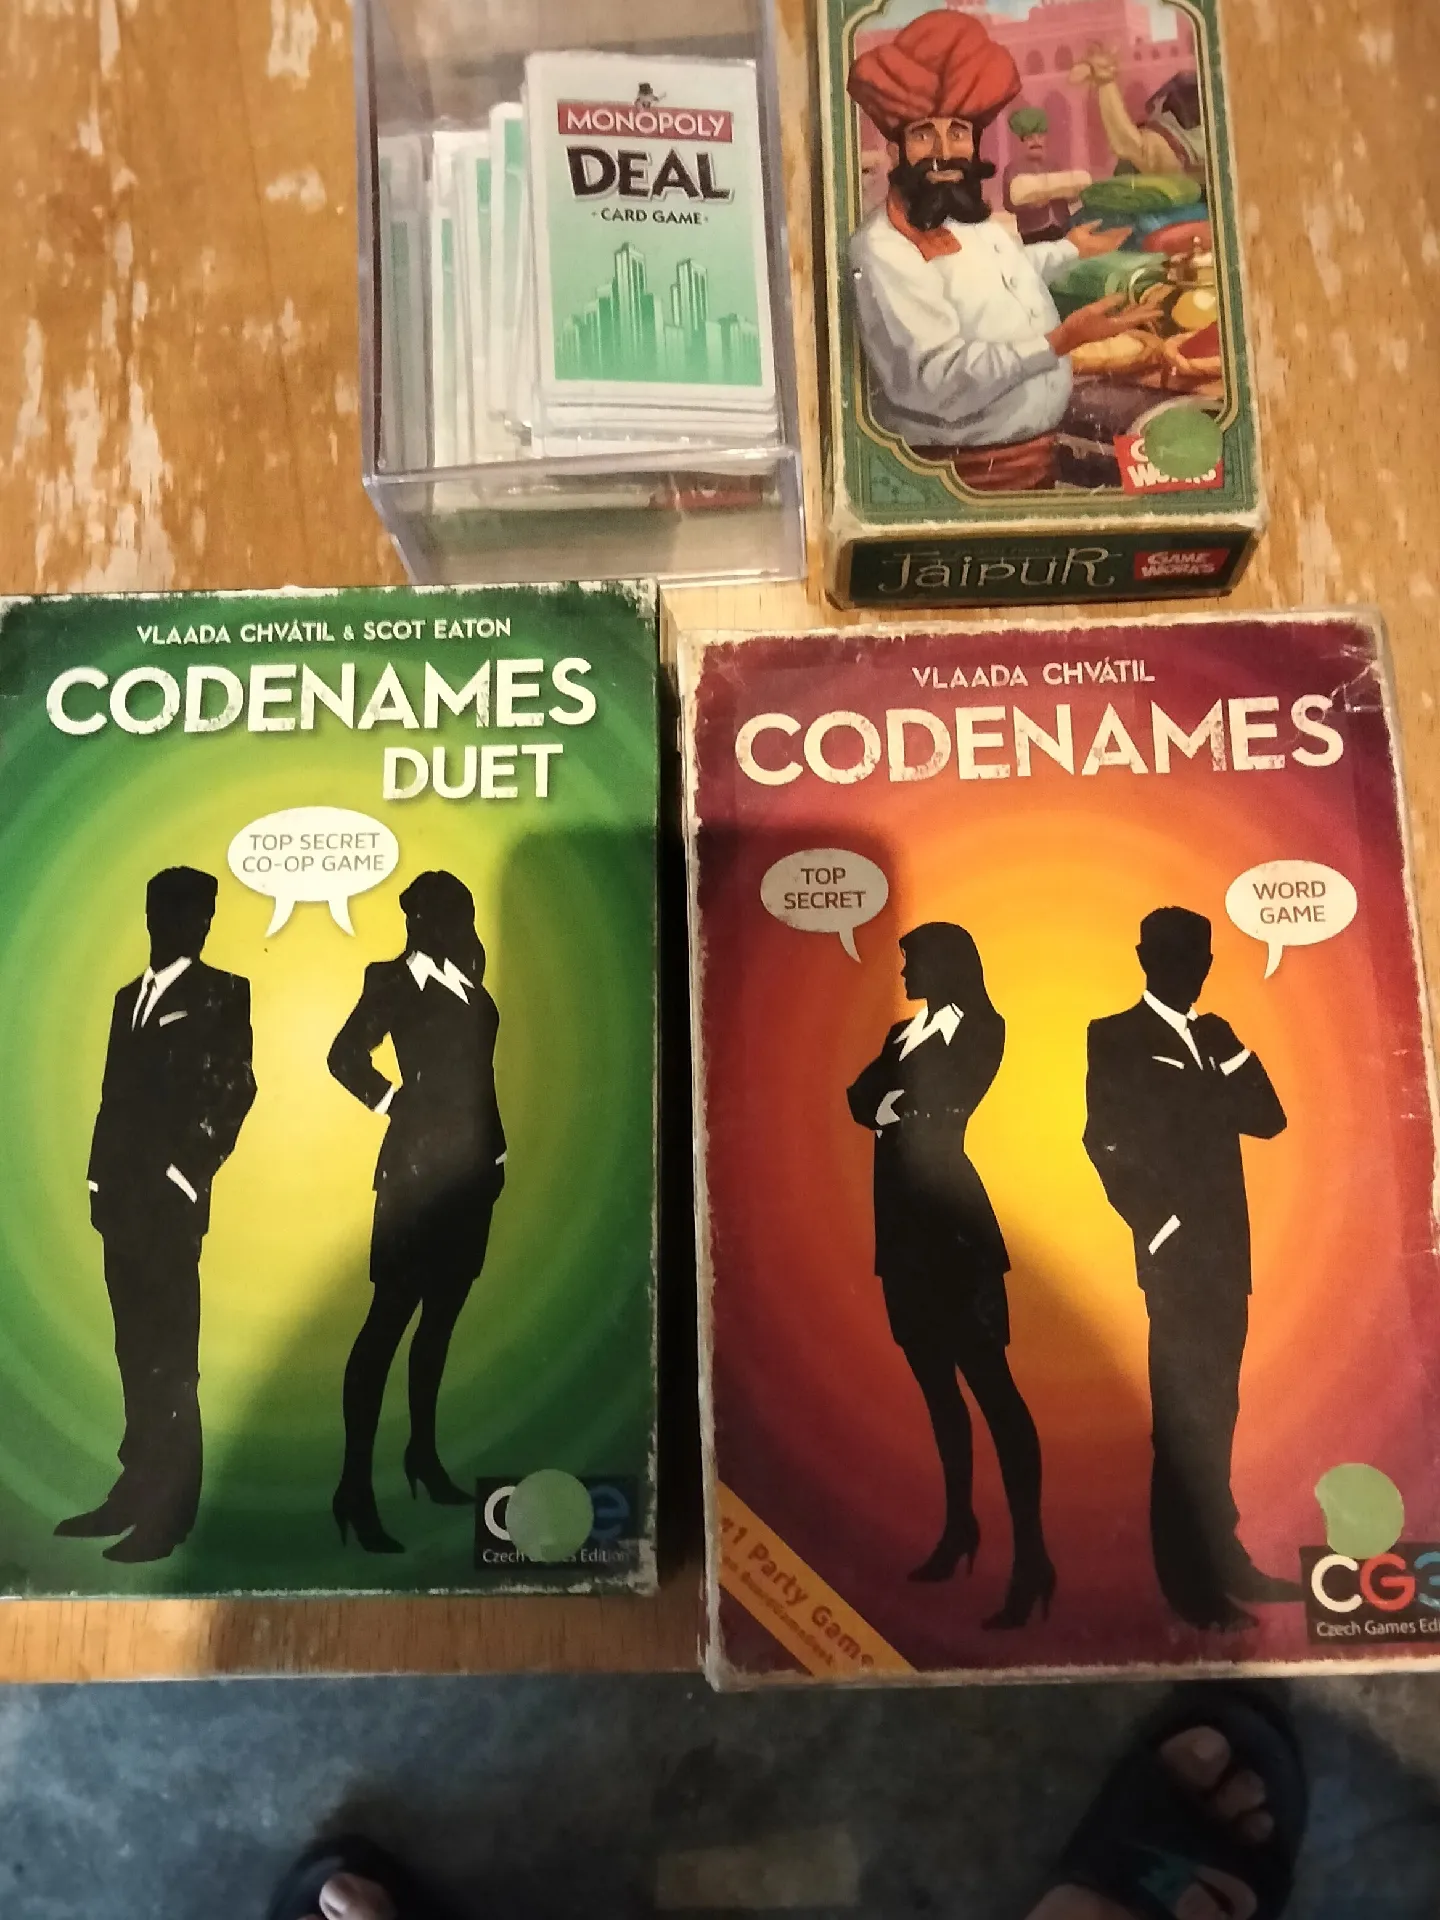 Codenames' two-player, co-op spin-off Duet is now free to play online